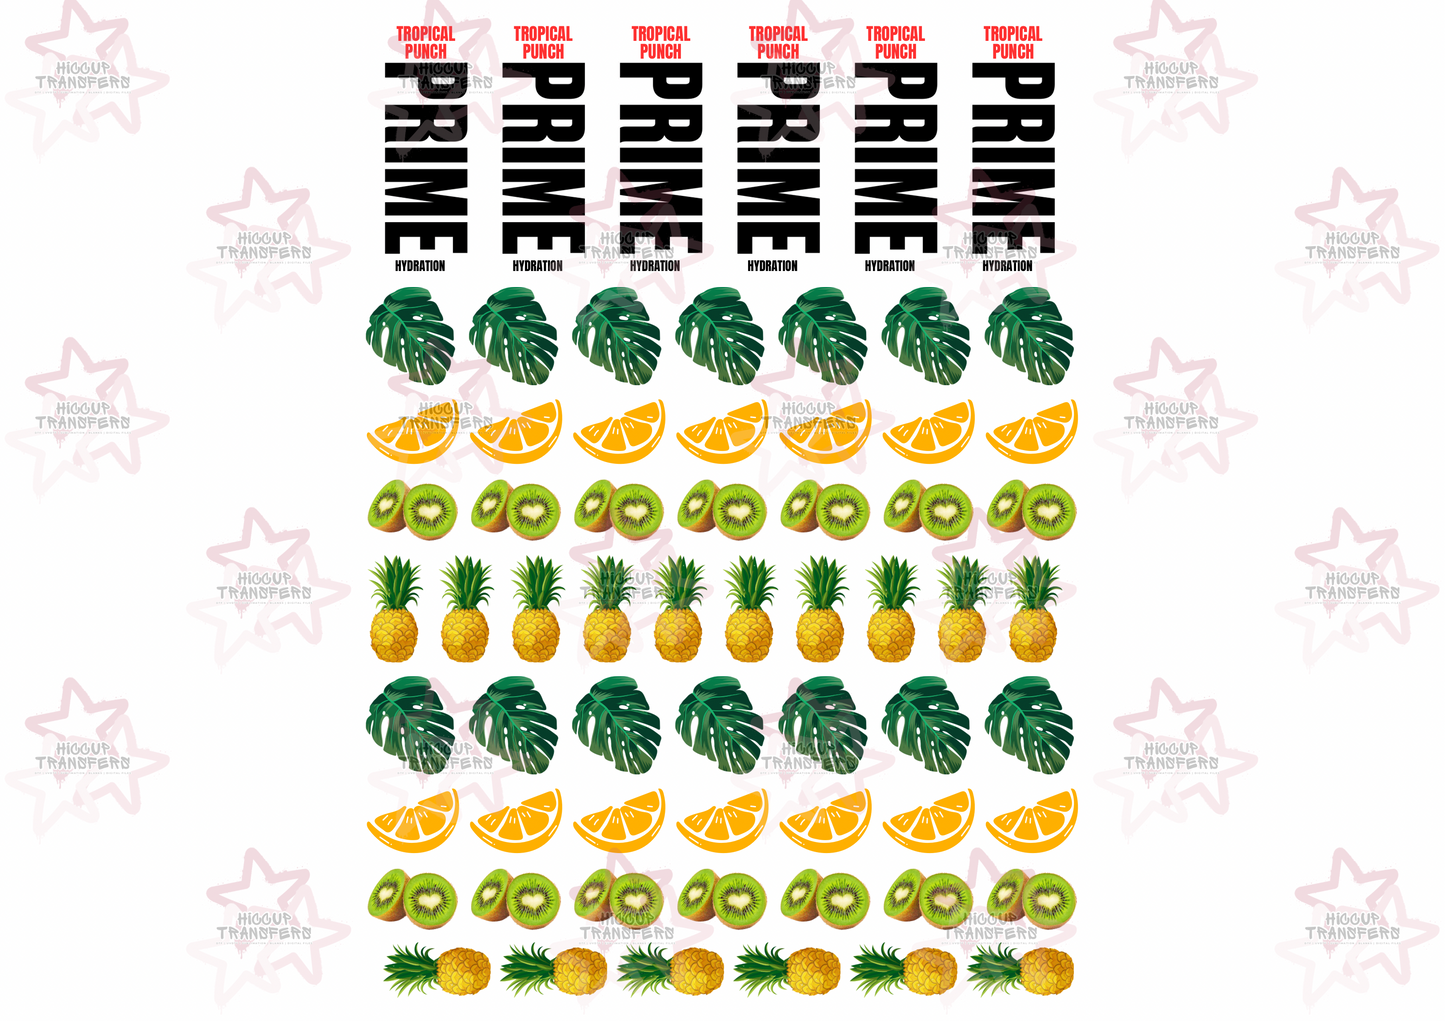 Tropical Punch Prime A3 Decal Sheet